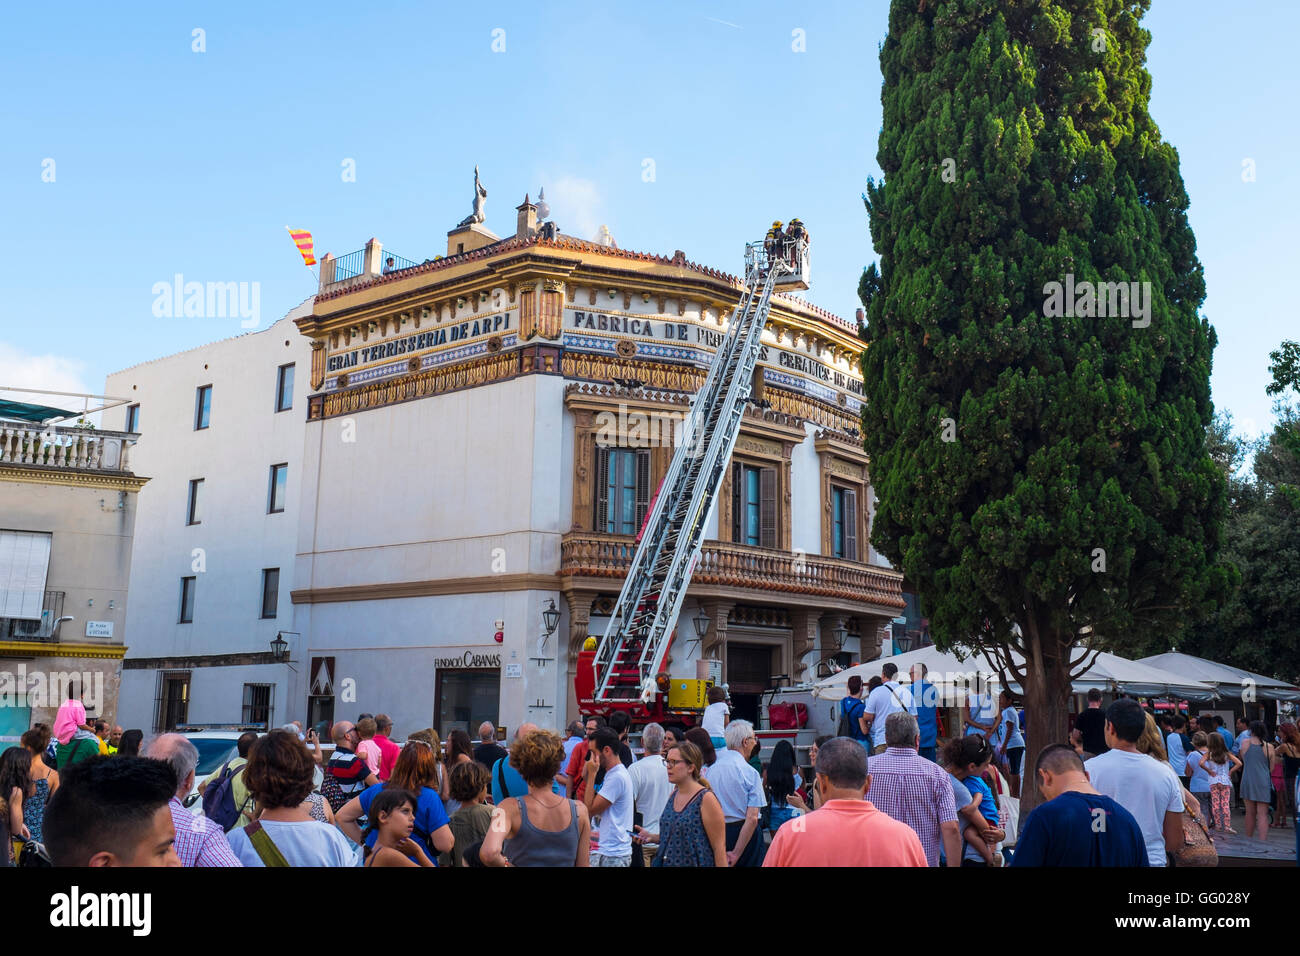 Barcelona, Catalonia, Spain, 1 August 2016. Firemen finish putting out a fire at the the historic ceramics factory Casa Museu Cal Gerrer, Placa Octavia, Sant Cugat del Valles, Barcelona, Catalonia, Spain, 1 August 2016. The fire started due to a build up of soot residue ina  chimney in a restaurant in the building. No injuries were caused, and the building was mostly undamaged. Dave Walsh/Alamy Live News. Stock Photo